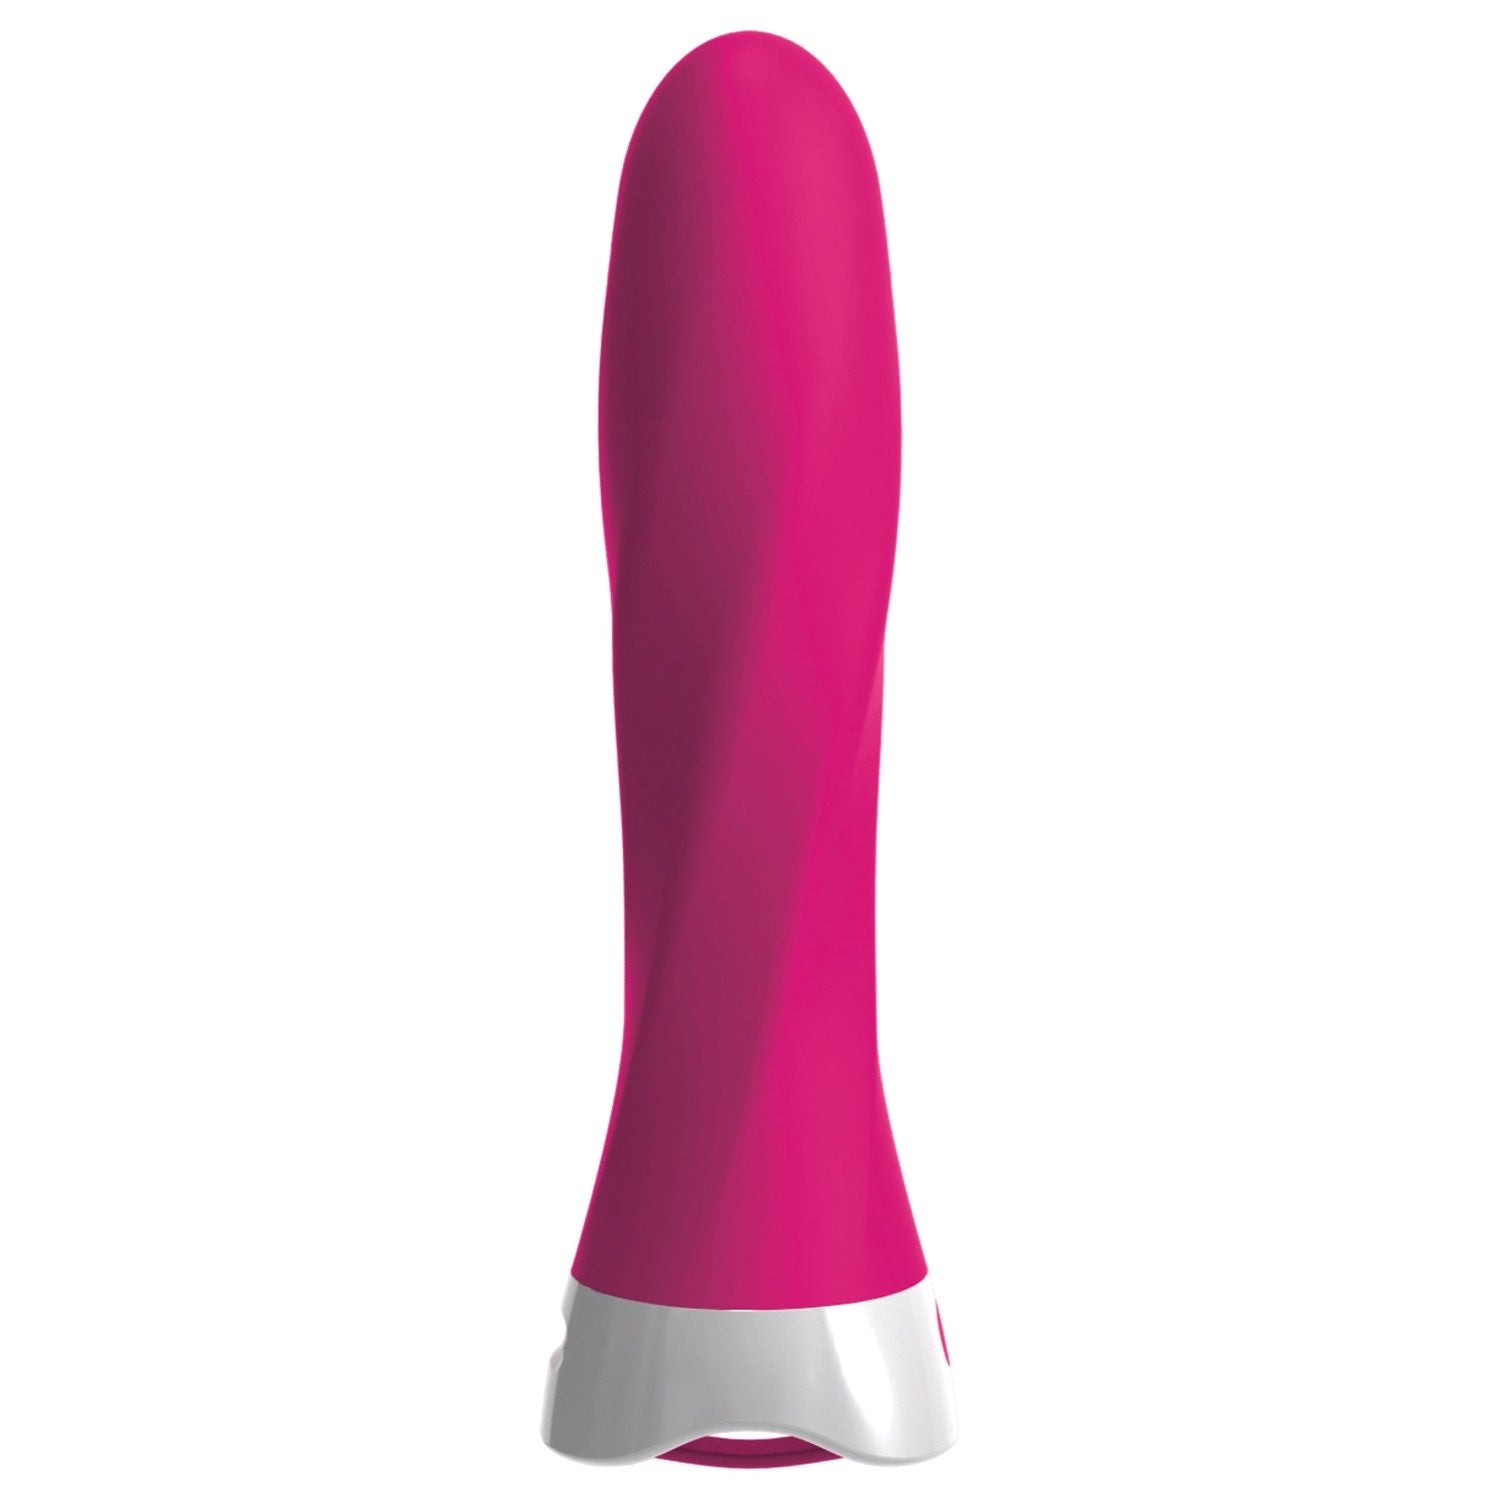 3Some Wall Banger Deluxe - Pink USB Rechargeable Vibrator with Wireless Remote by Pipedream